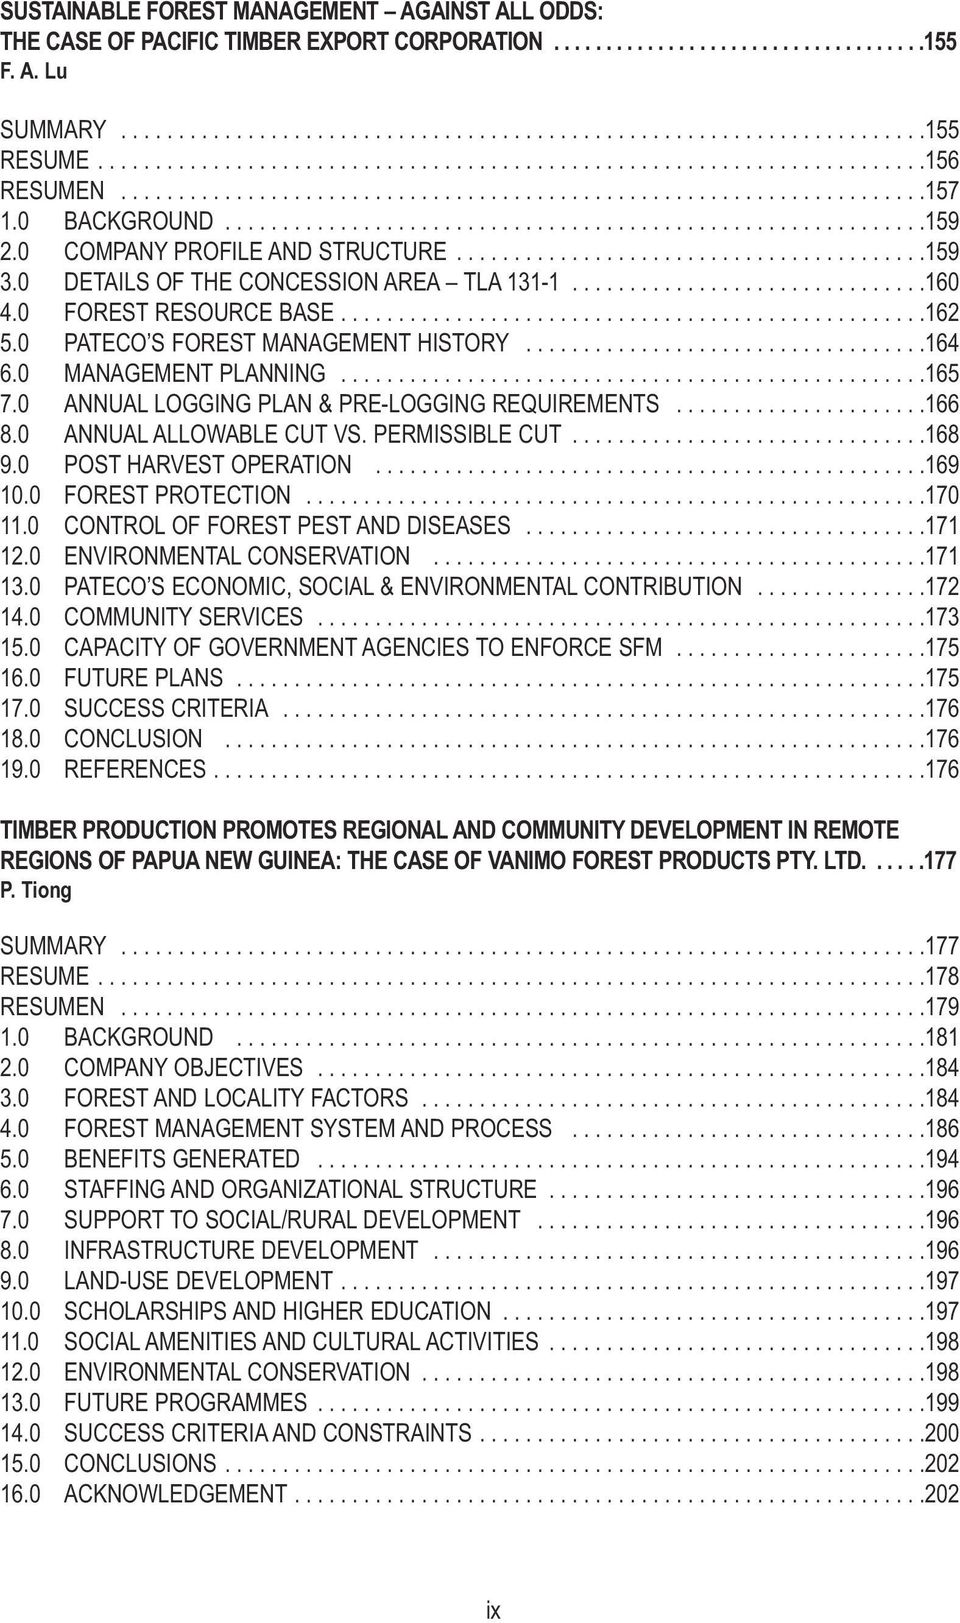 0 COMPANY PROFILE AND STRUCTURE.........................................159 3.0 DETAILS OF THE CONCESSION AREA TLA 131-1...............................160 4.0 FOREST RESOURCE BASE...................................................162 5.